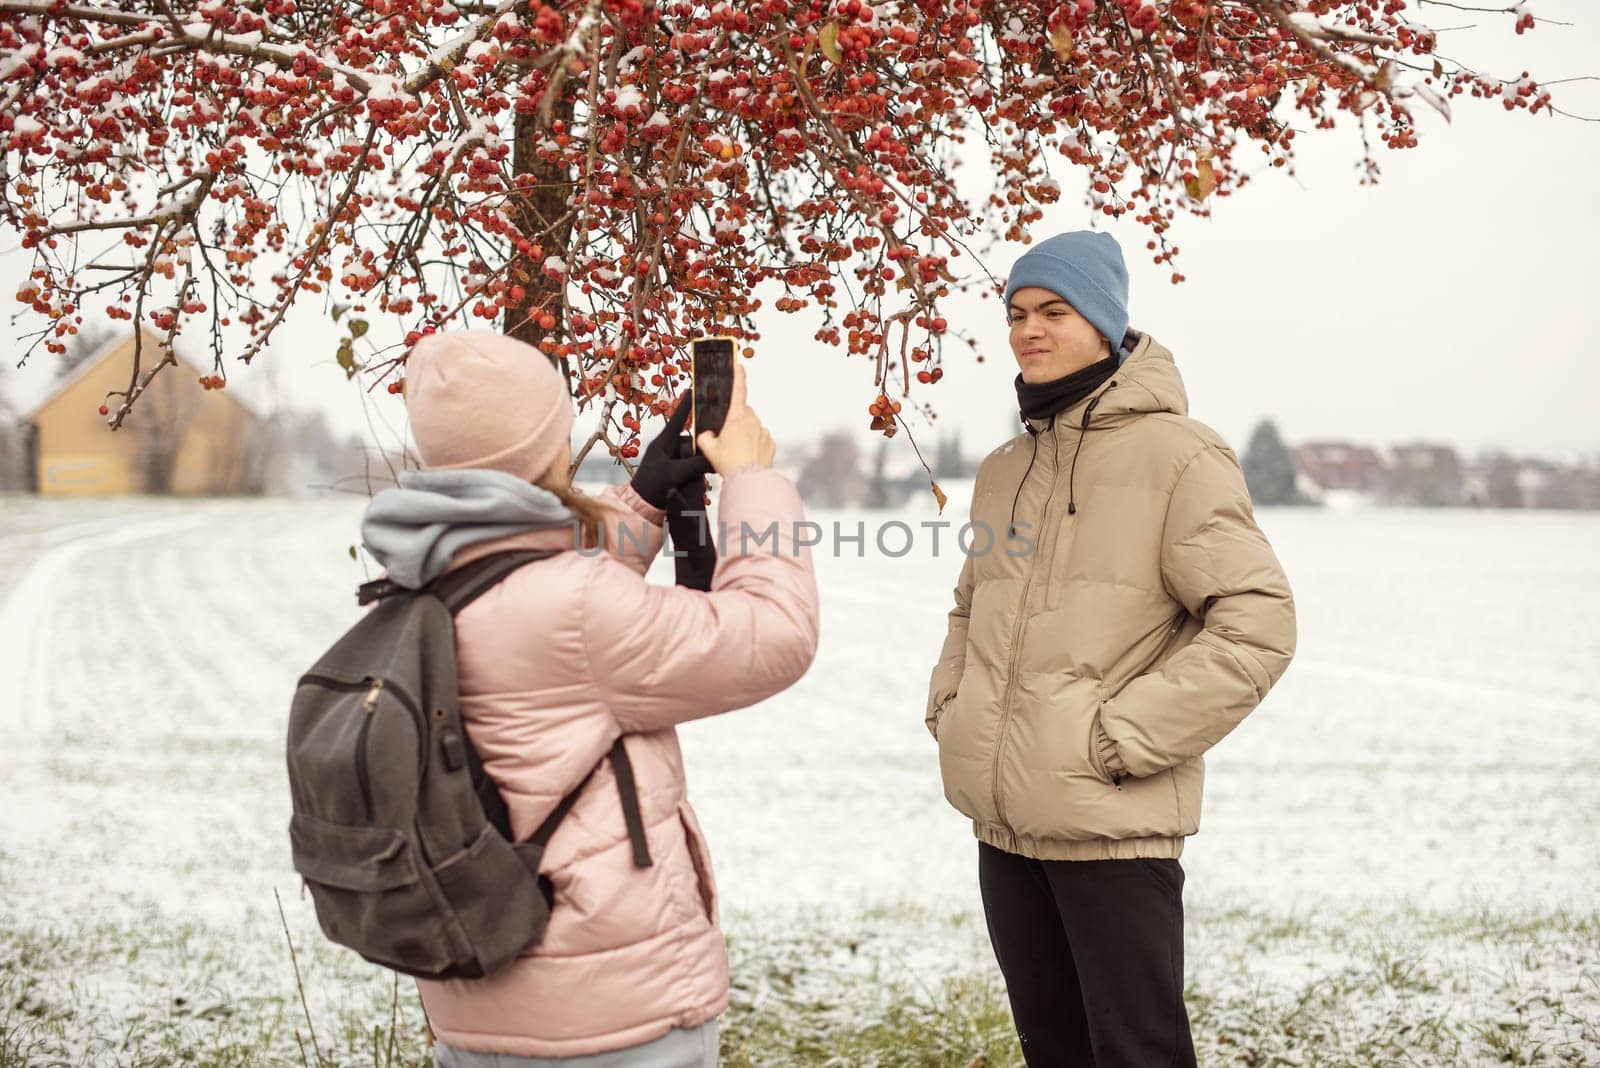 Winter Romance: Girl in Pink Winter Jacket Photographing Boy Against Snow-Covered Red Tree and Field. by Andrii_Ko